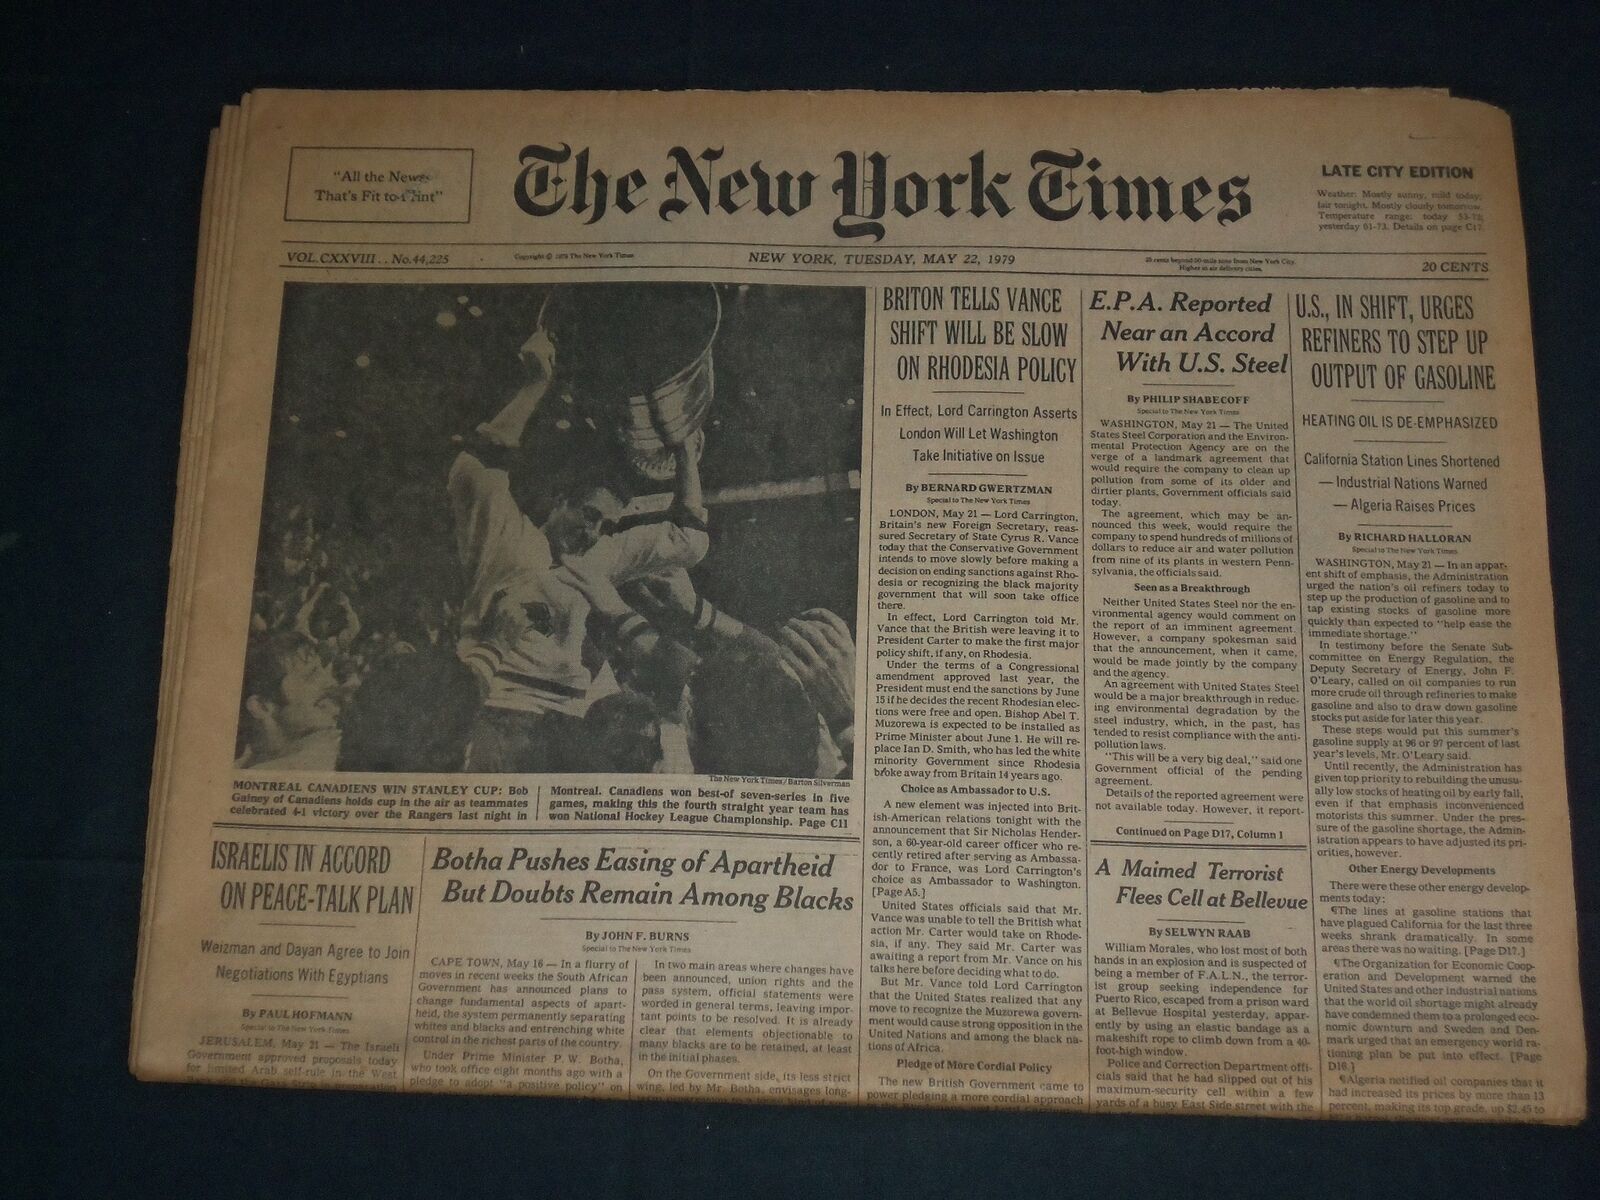 1979 MAY 22 THE NEW YORK TIMES - MONTREAL CANADIANS WIN STANLEY CUP - NP 3549